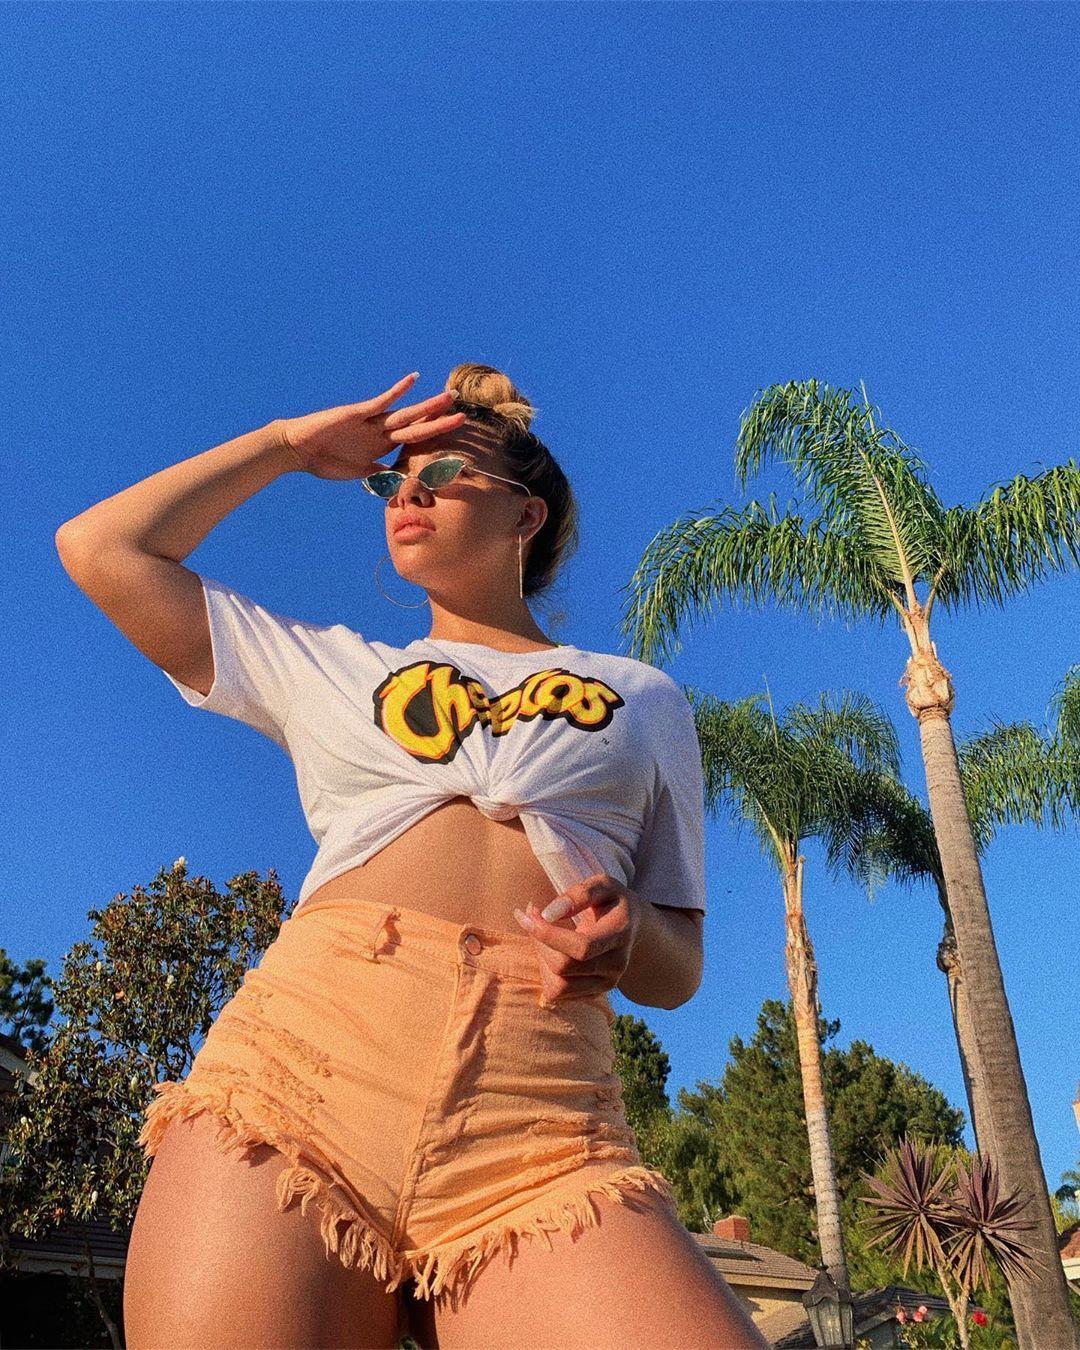 51 Hot Pictures Of Dinah Jane That Will Make Your Heart Pound For Her | Best Of Comic Books